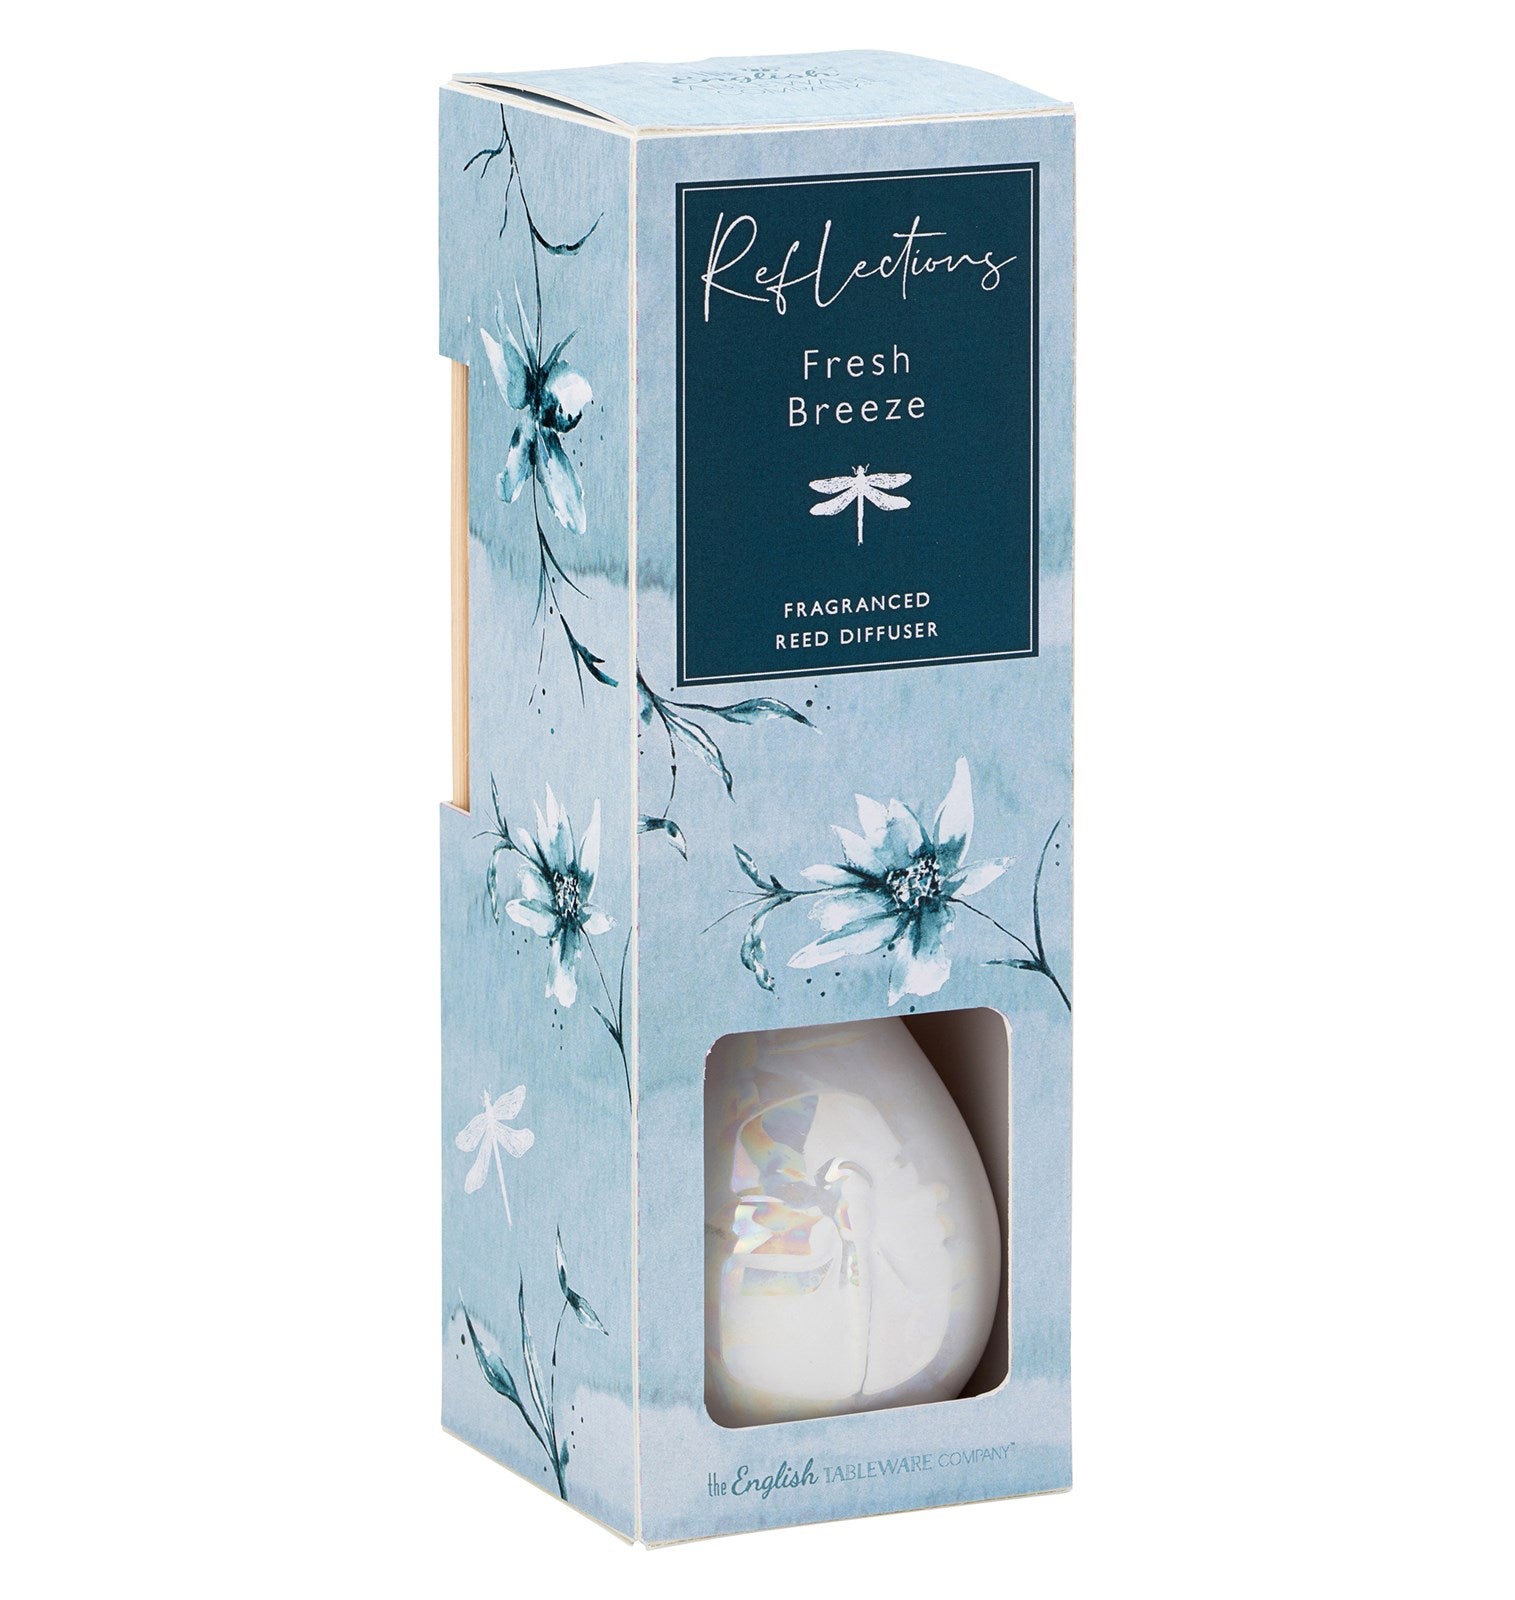 The English Tableware Company Reflections Reed Diffuser Set